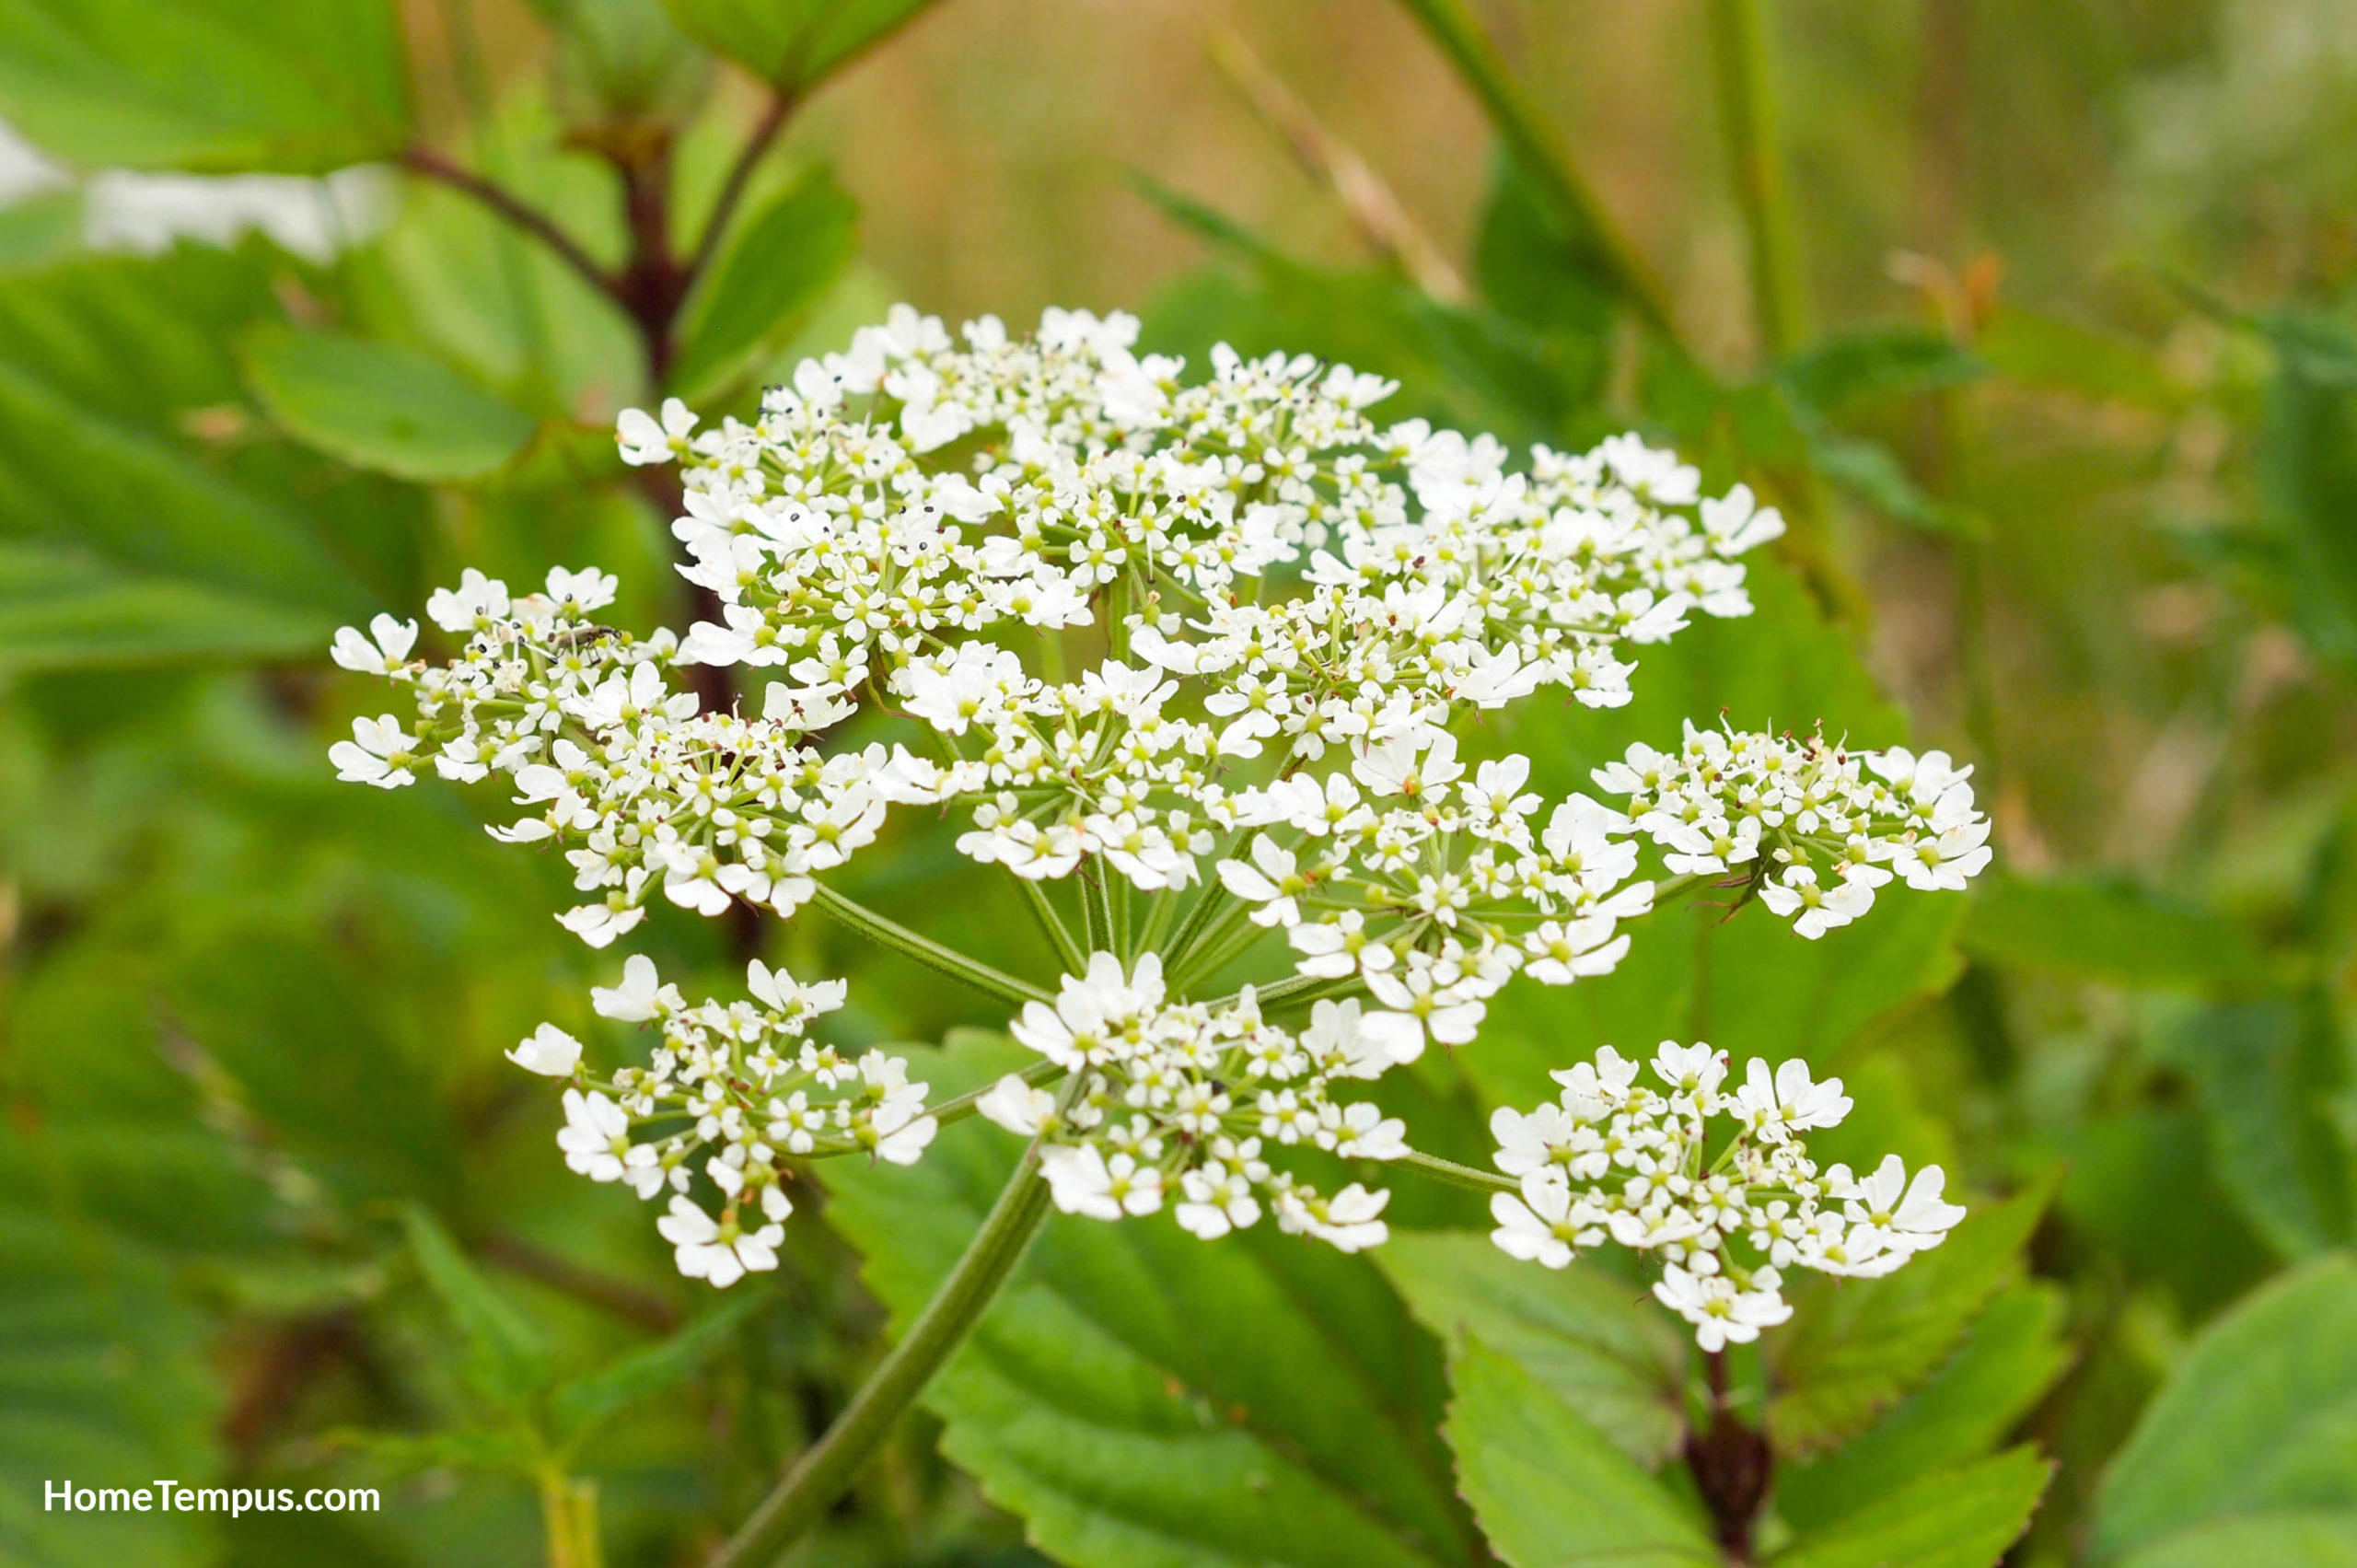 Flowers That Start with C, Cow Parsley (Anthriscus sylvestris)